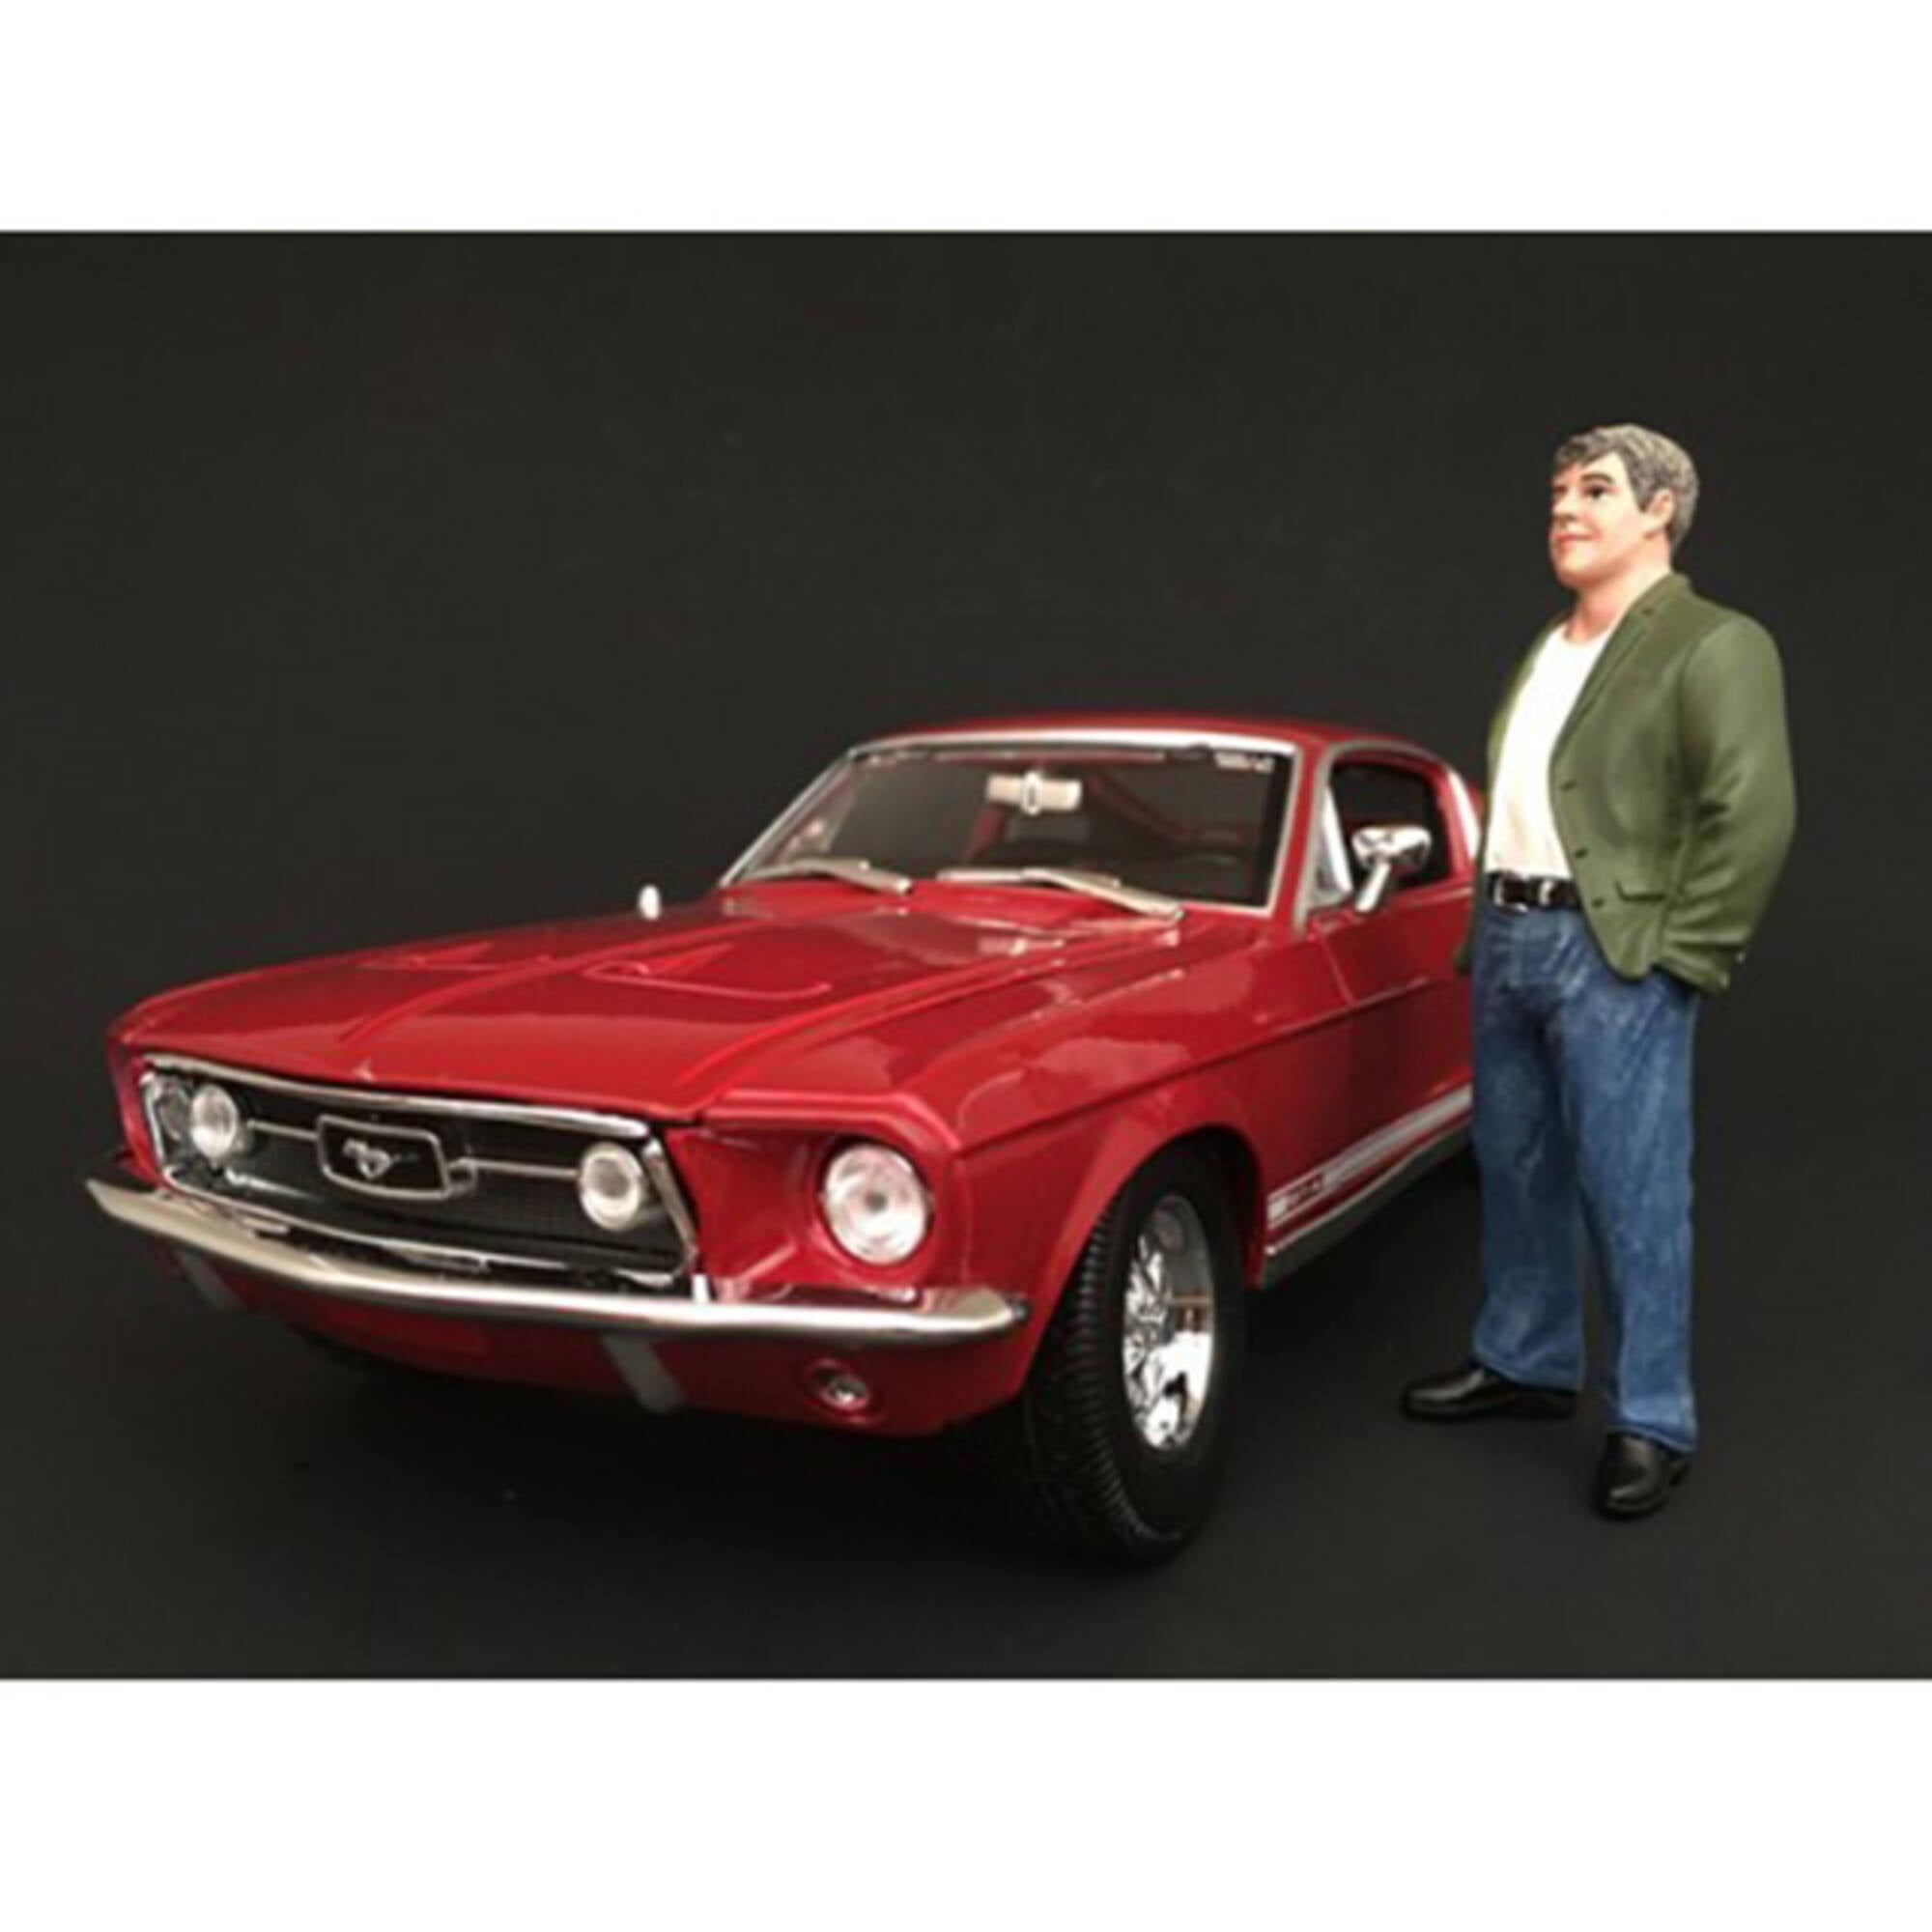 77507 70s Style Figure Vii For 1 Isto 24 Model Car